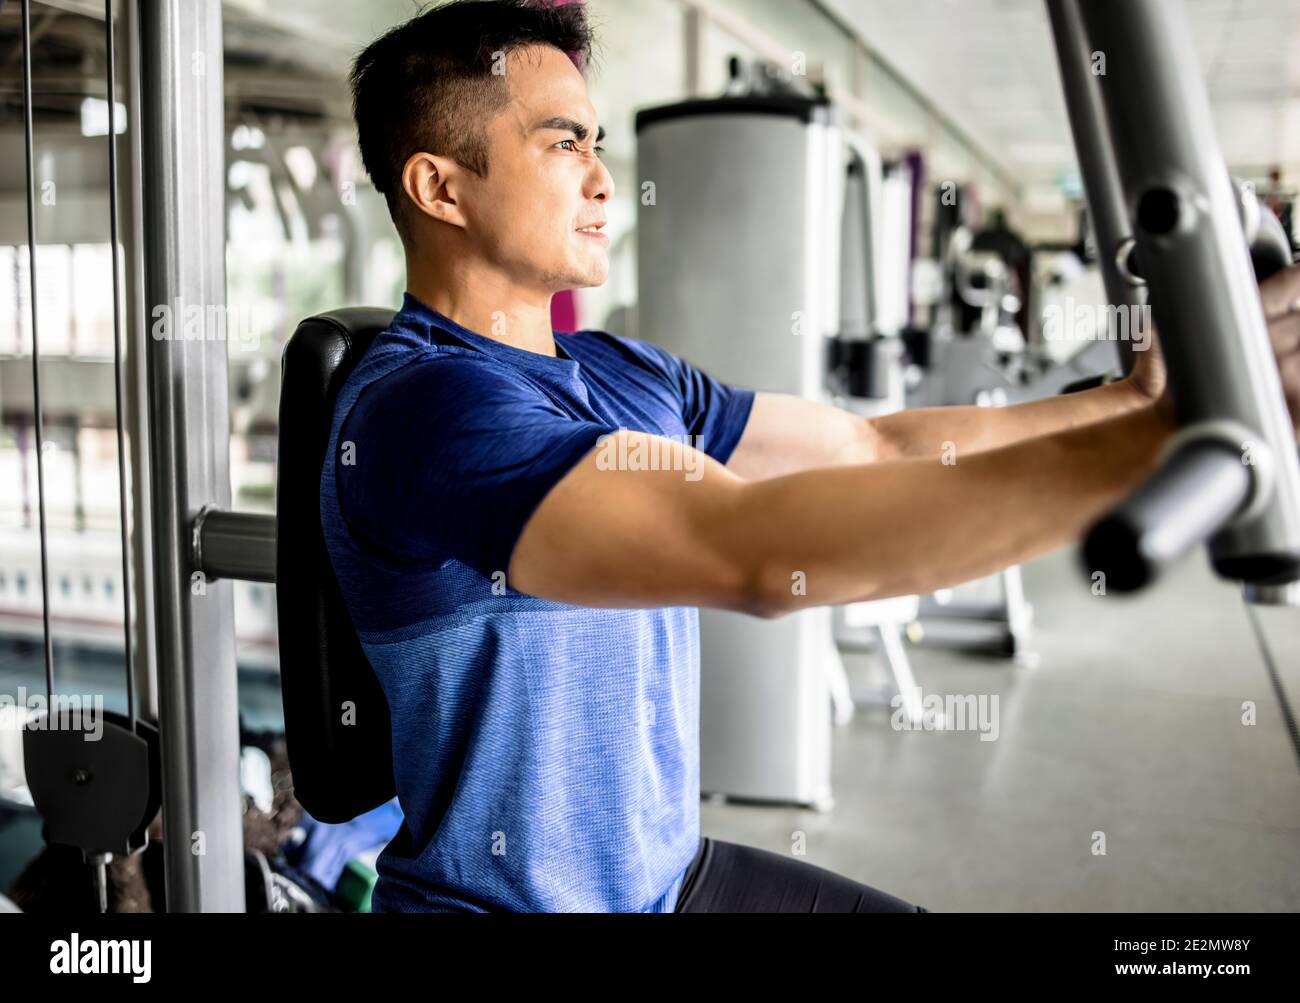 Young Male Doing Chest Exercises in the Gym Stock Image - Image of